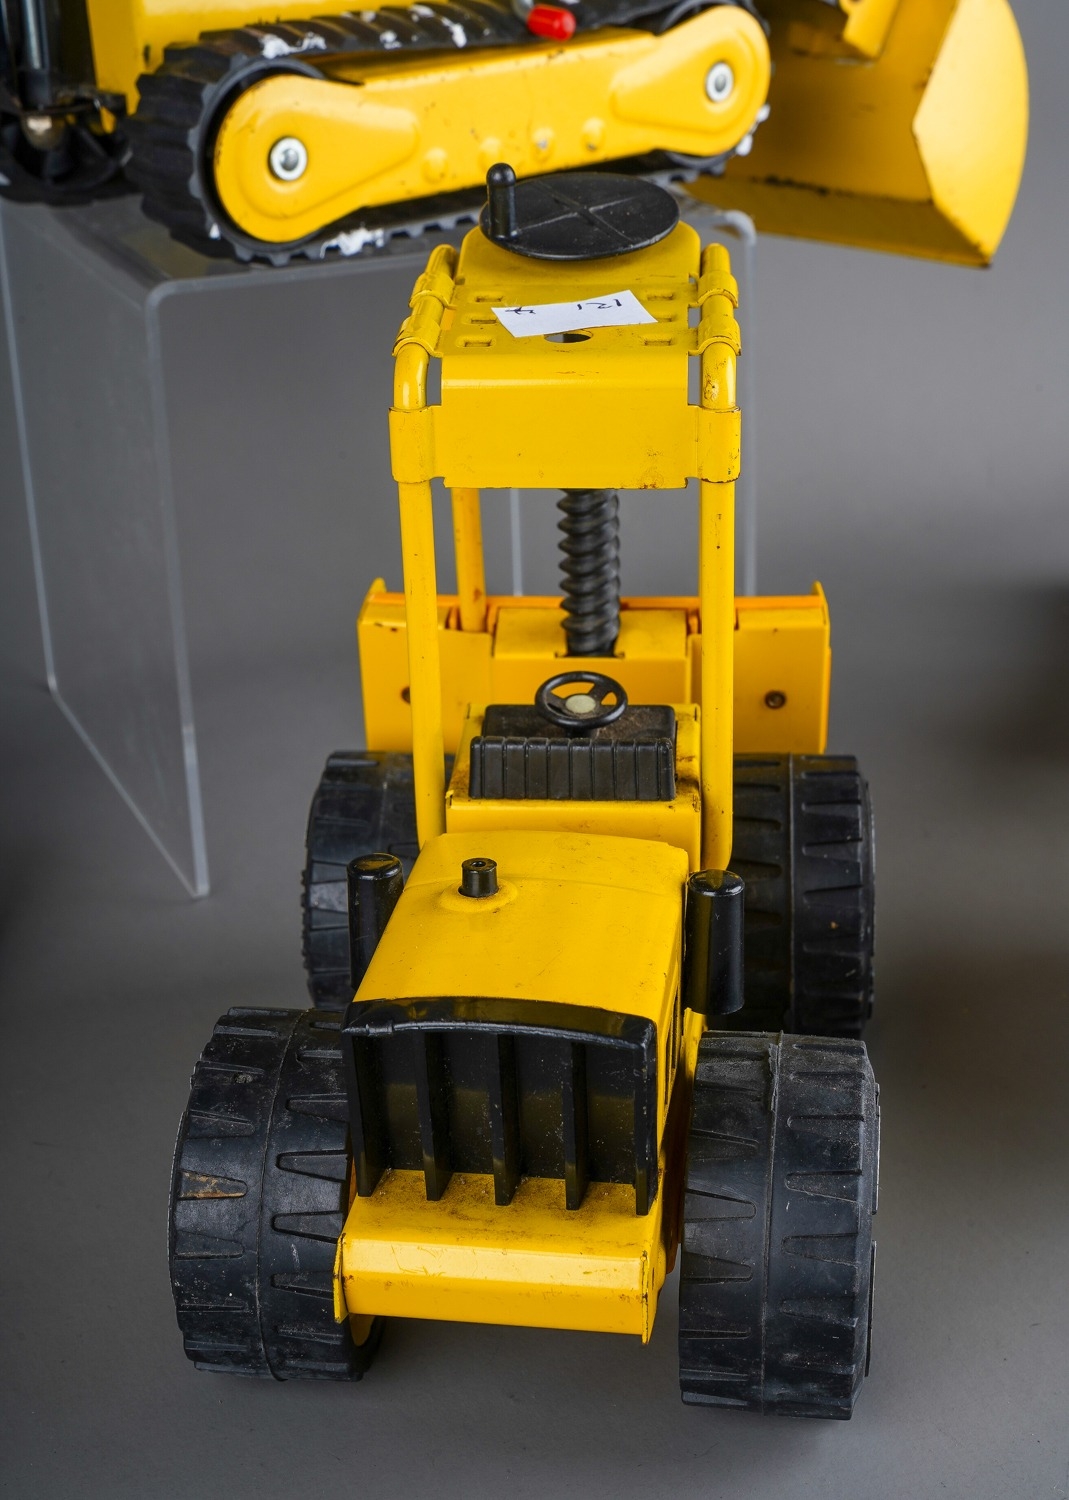 Tonka Toy. A group of medium sized construction vehicles in yellow, including scraper and forklift - Image 3 of 8